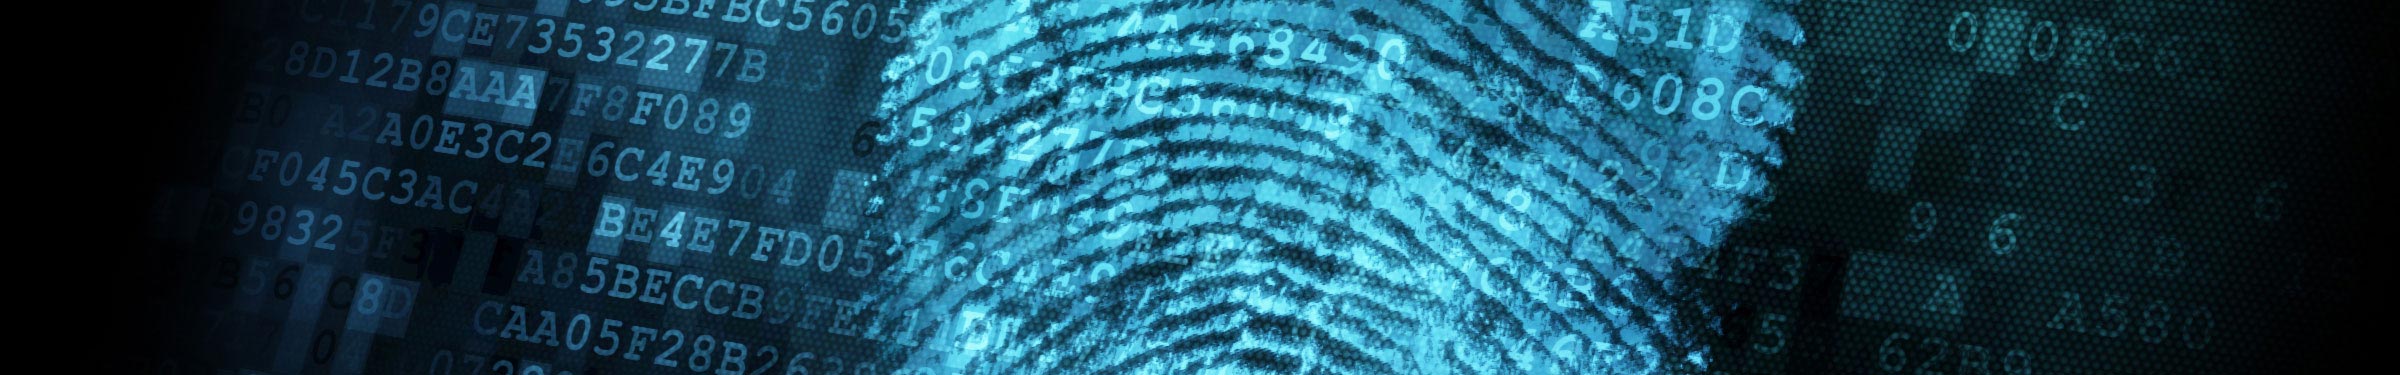 finger print and code abstract image